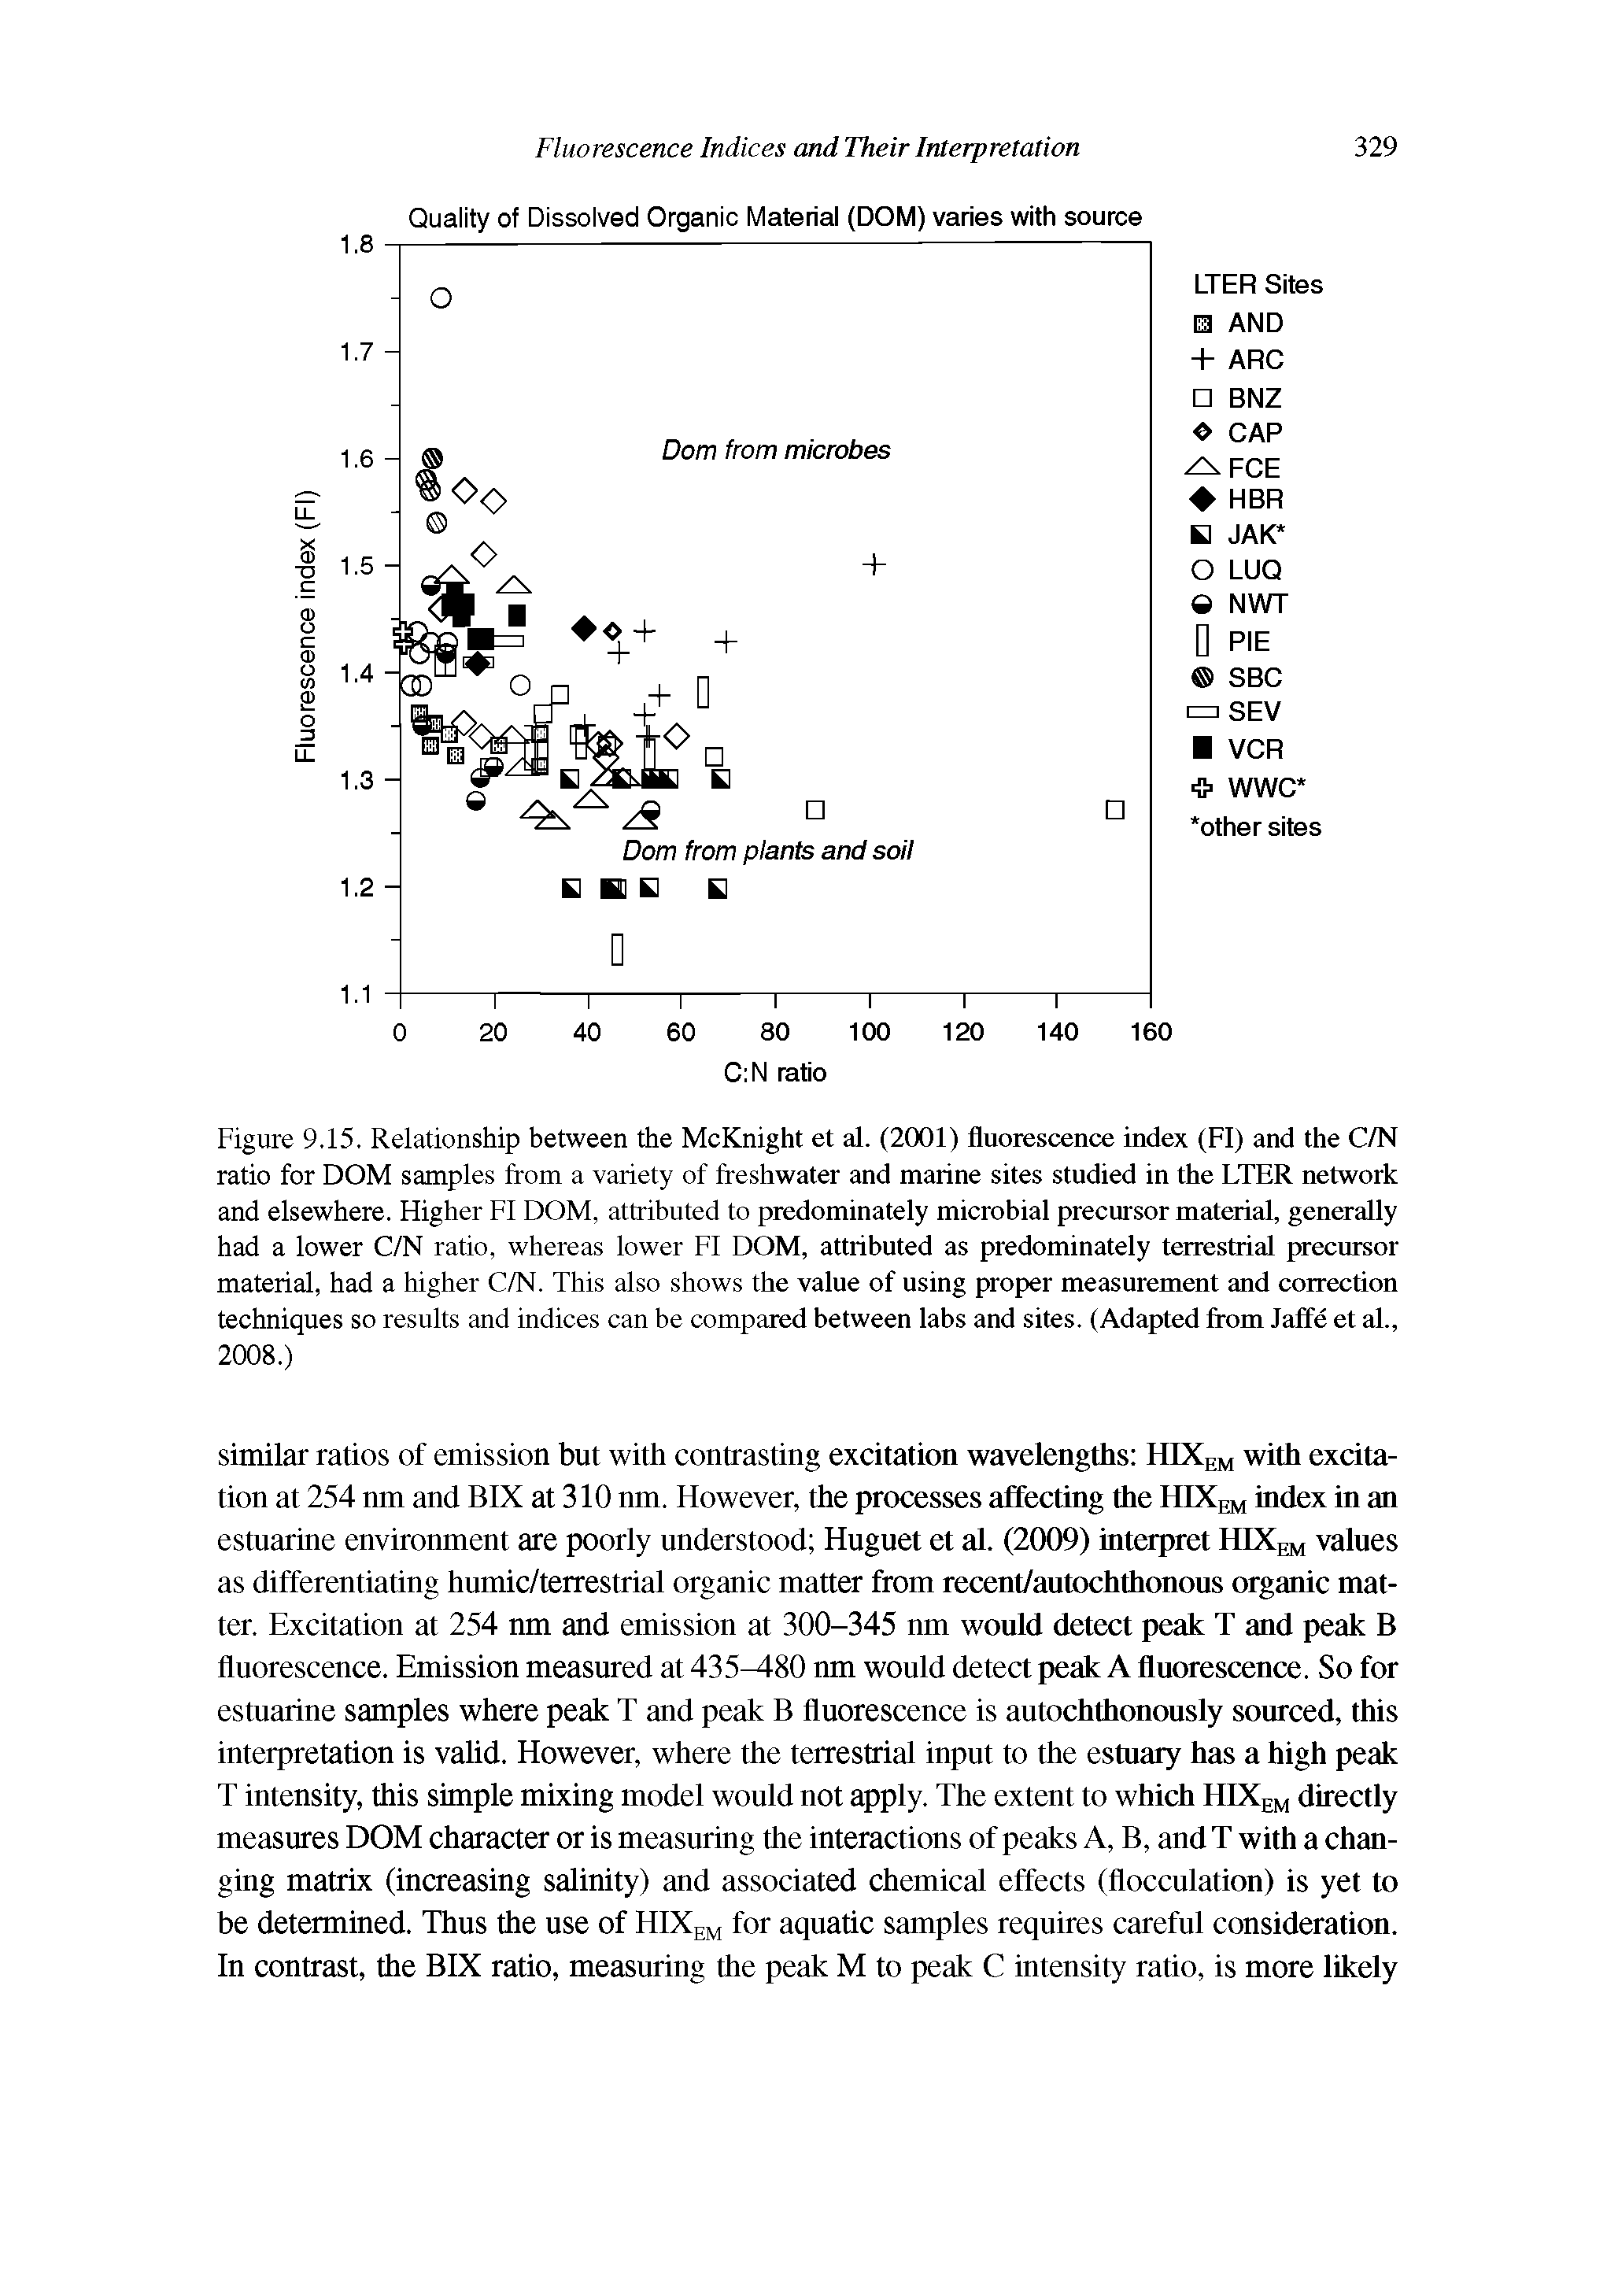 Figure 9.15. Relationship between the McKnight et al. (2001) fluorescence index (FI) and the C/N ratio for DOM samples from a variety of freshwater and marine sites studied in the LTER network and elsewhere. Higher FI DOM, attributed to predominately microbial precursor material, generally had a lower C/N ratio, whereas lower FI DOM, attributed as predominately terrestrial precursor material, had a higher C/N. This also shows the value of using proper measurement and correction techniques so results and indices can be compared between labs and sites. (Adapted from Jaffe et al., 2008.)...